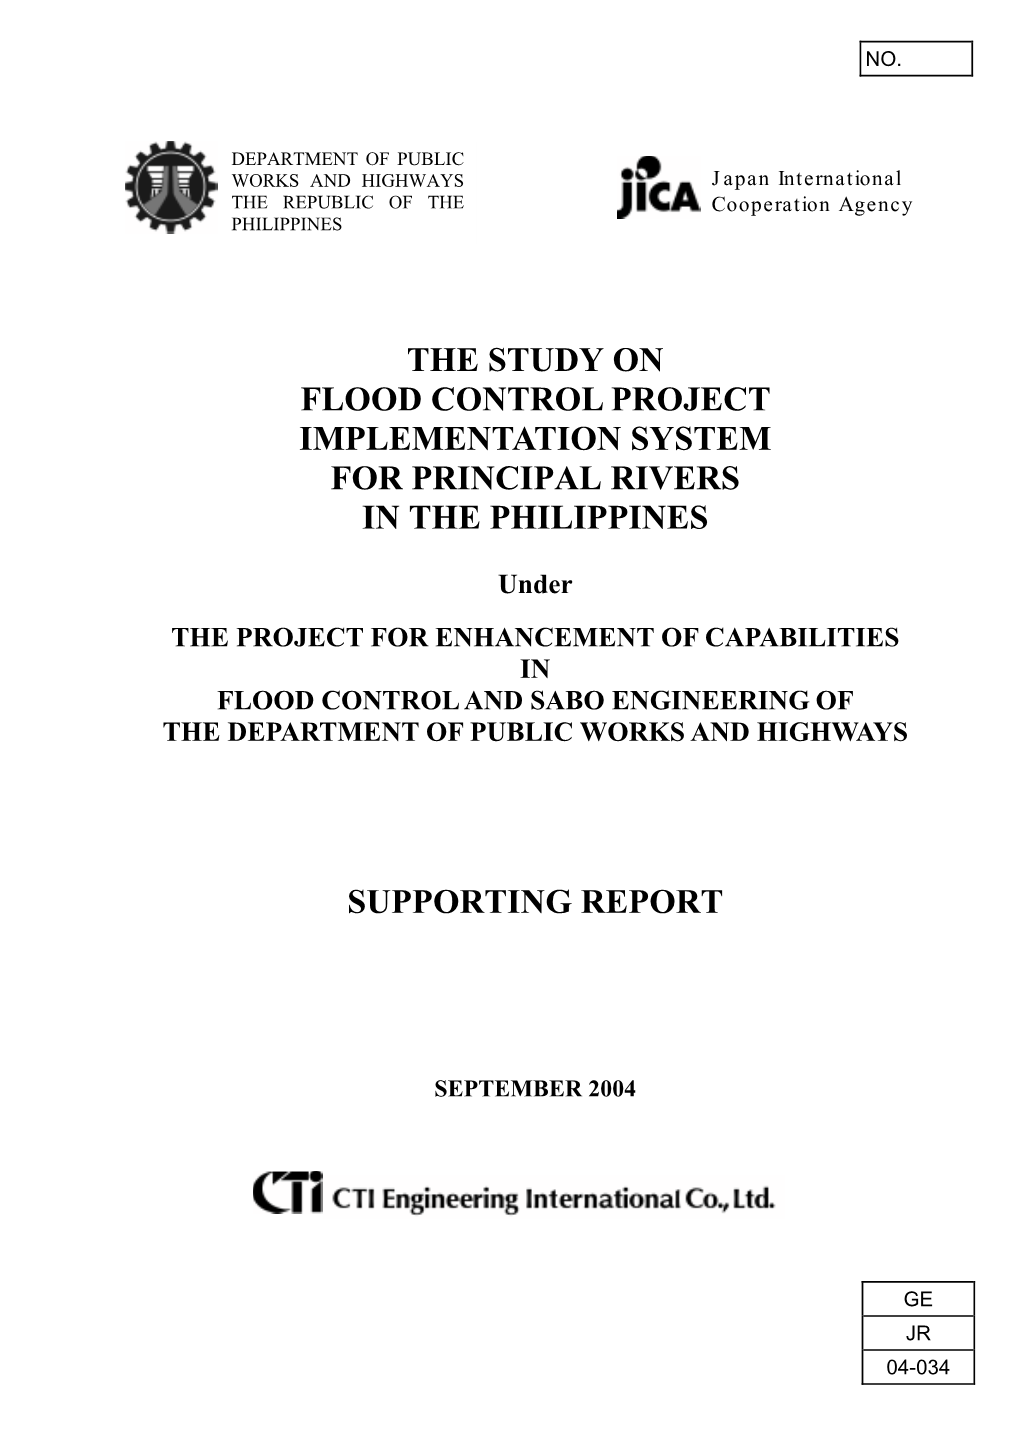 The Study on Flood Control Project Implementation System for Principal Rivers in the Philippines